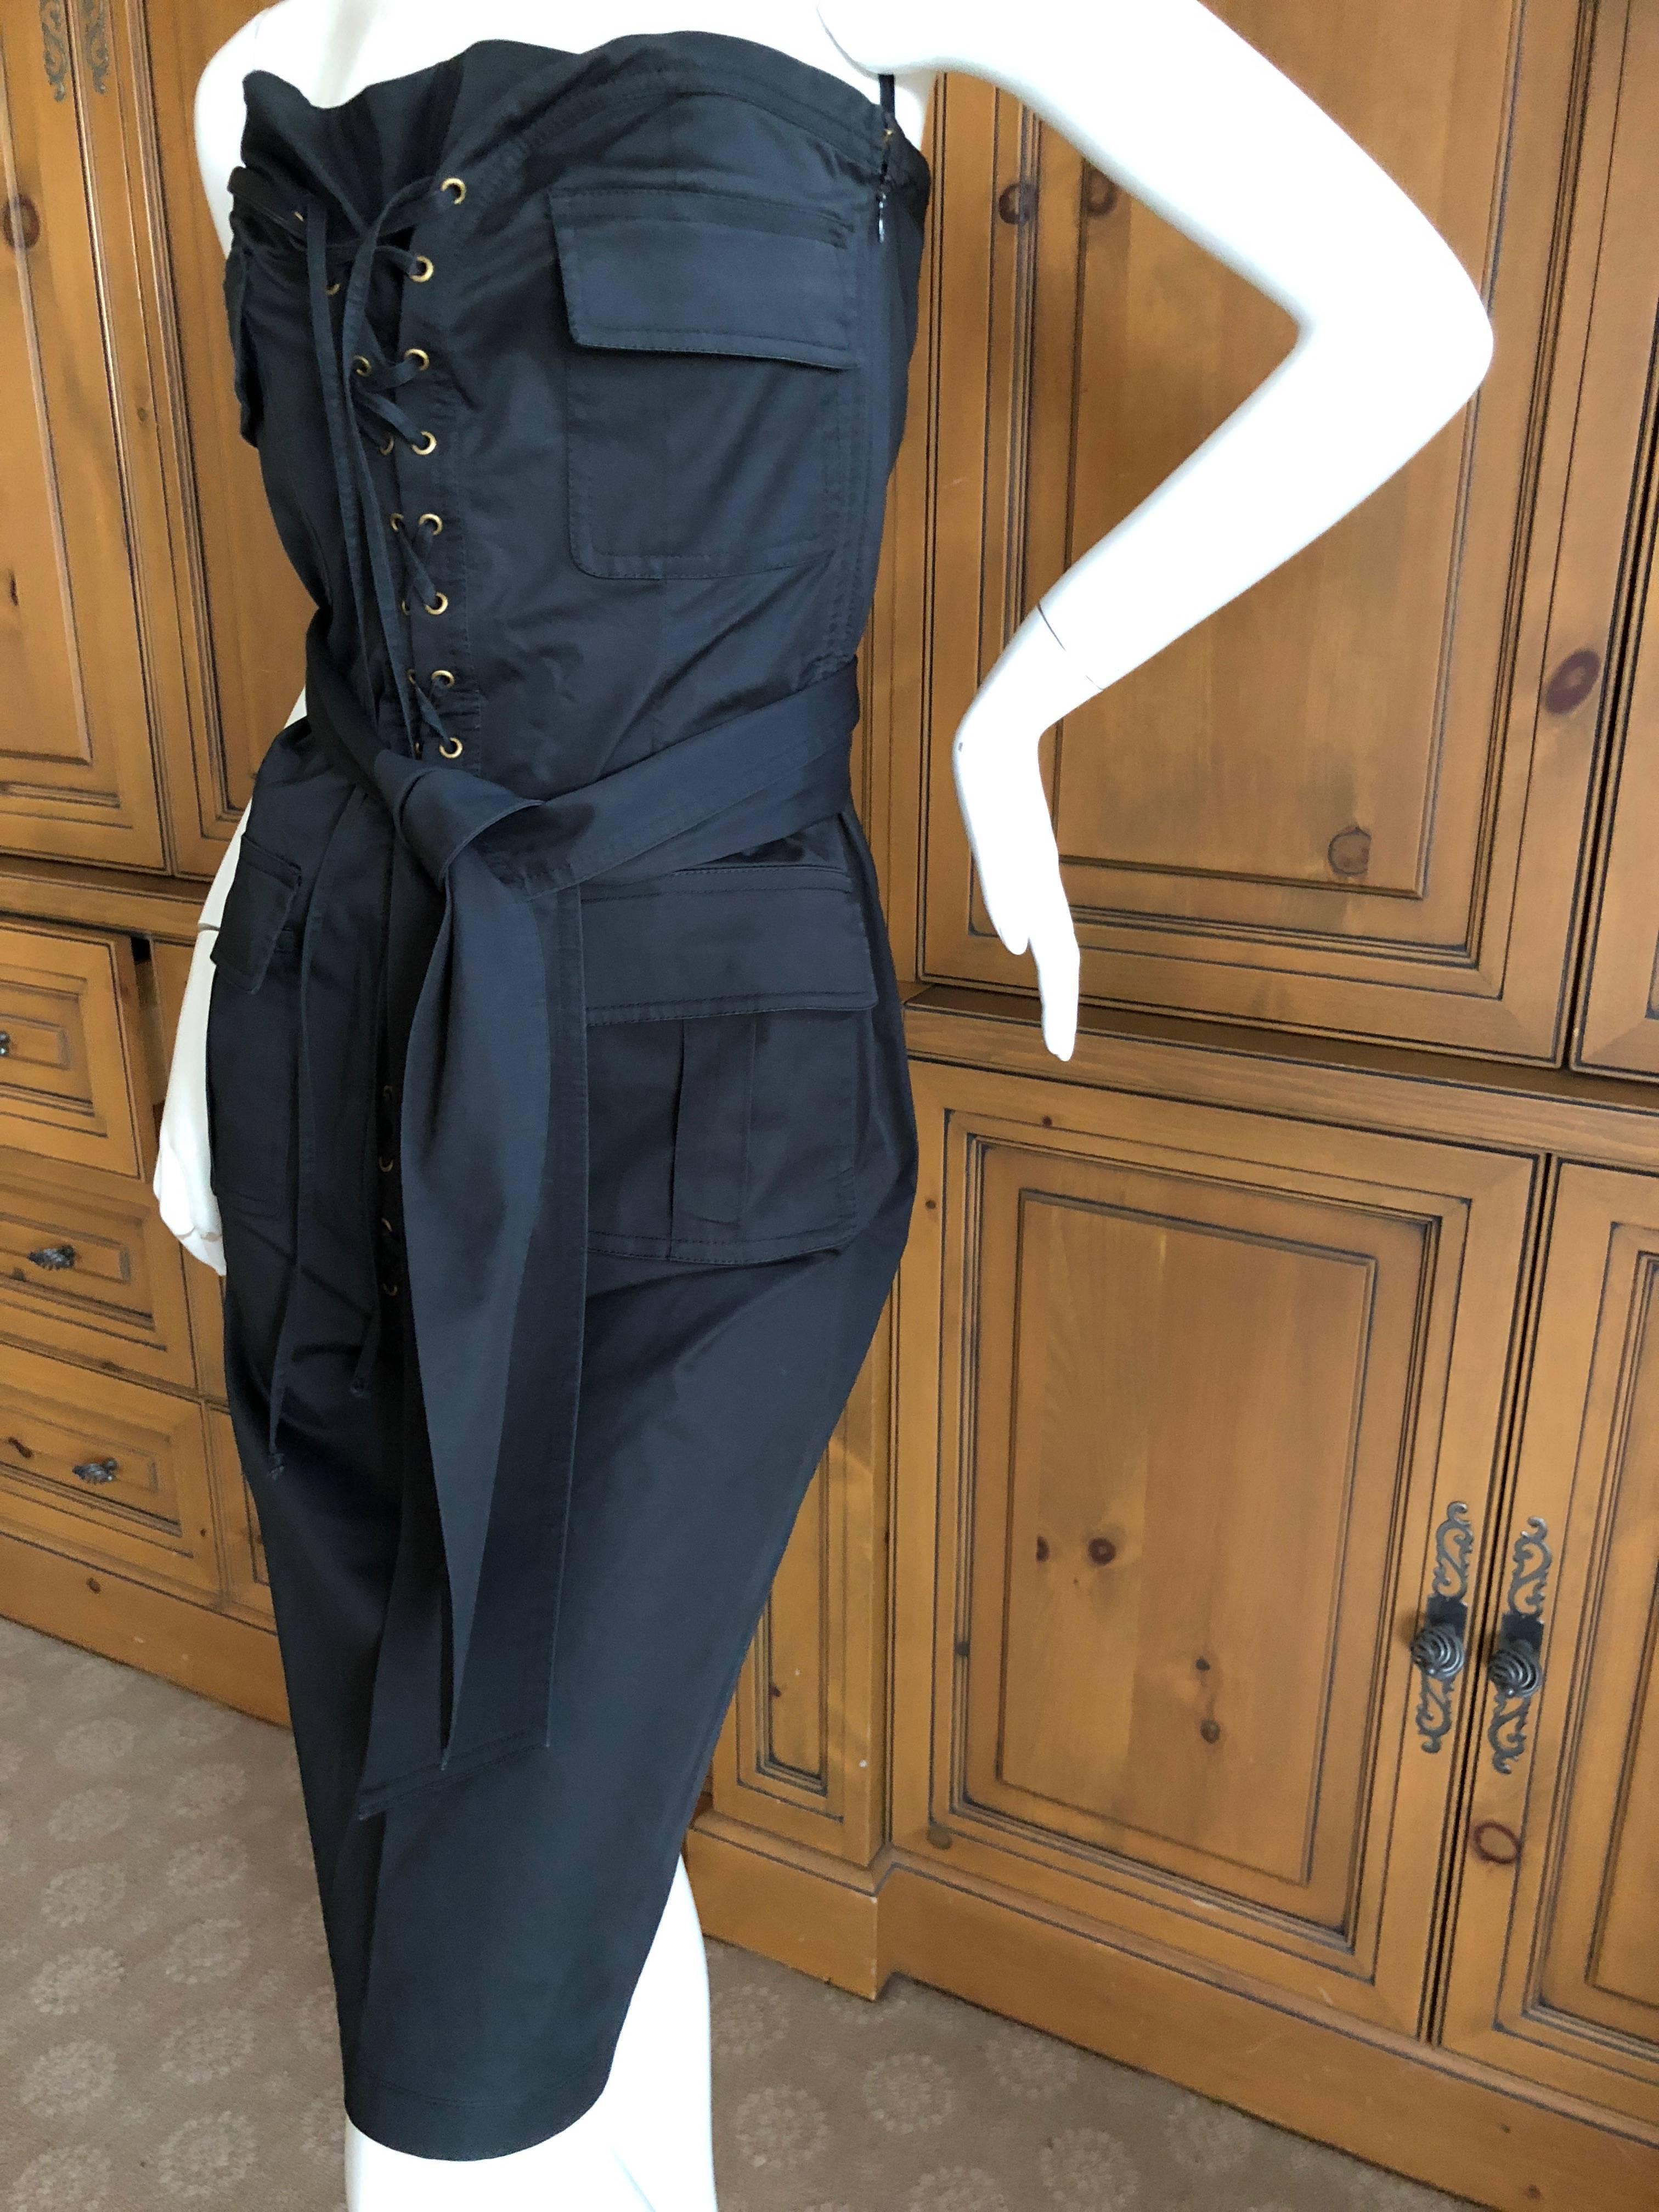 Yves Saint Laurent by Tom Ford Strapless Black Safari Dress with Corset Lacing  For Sale 5